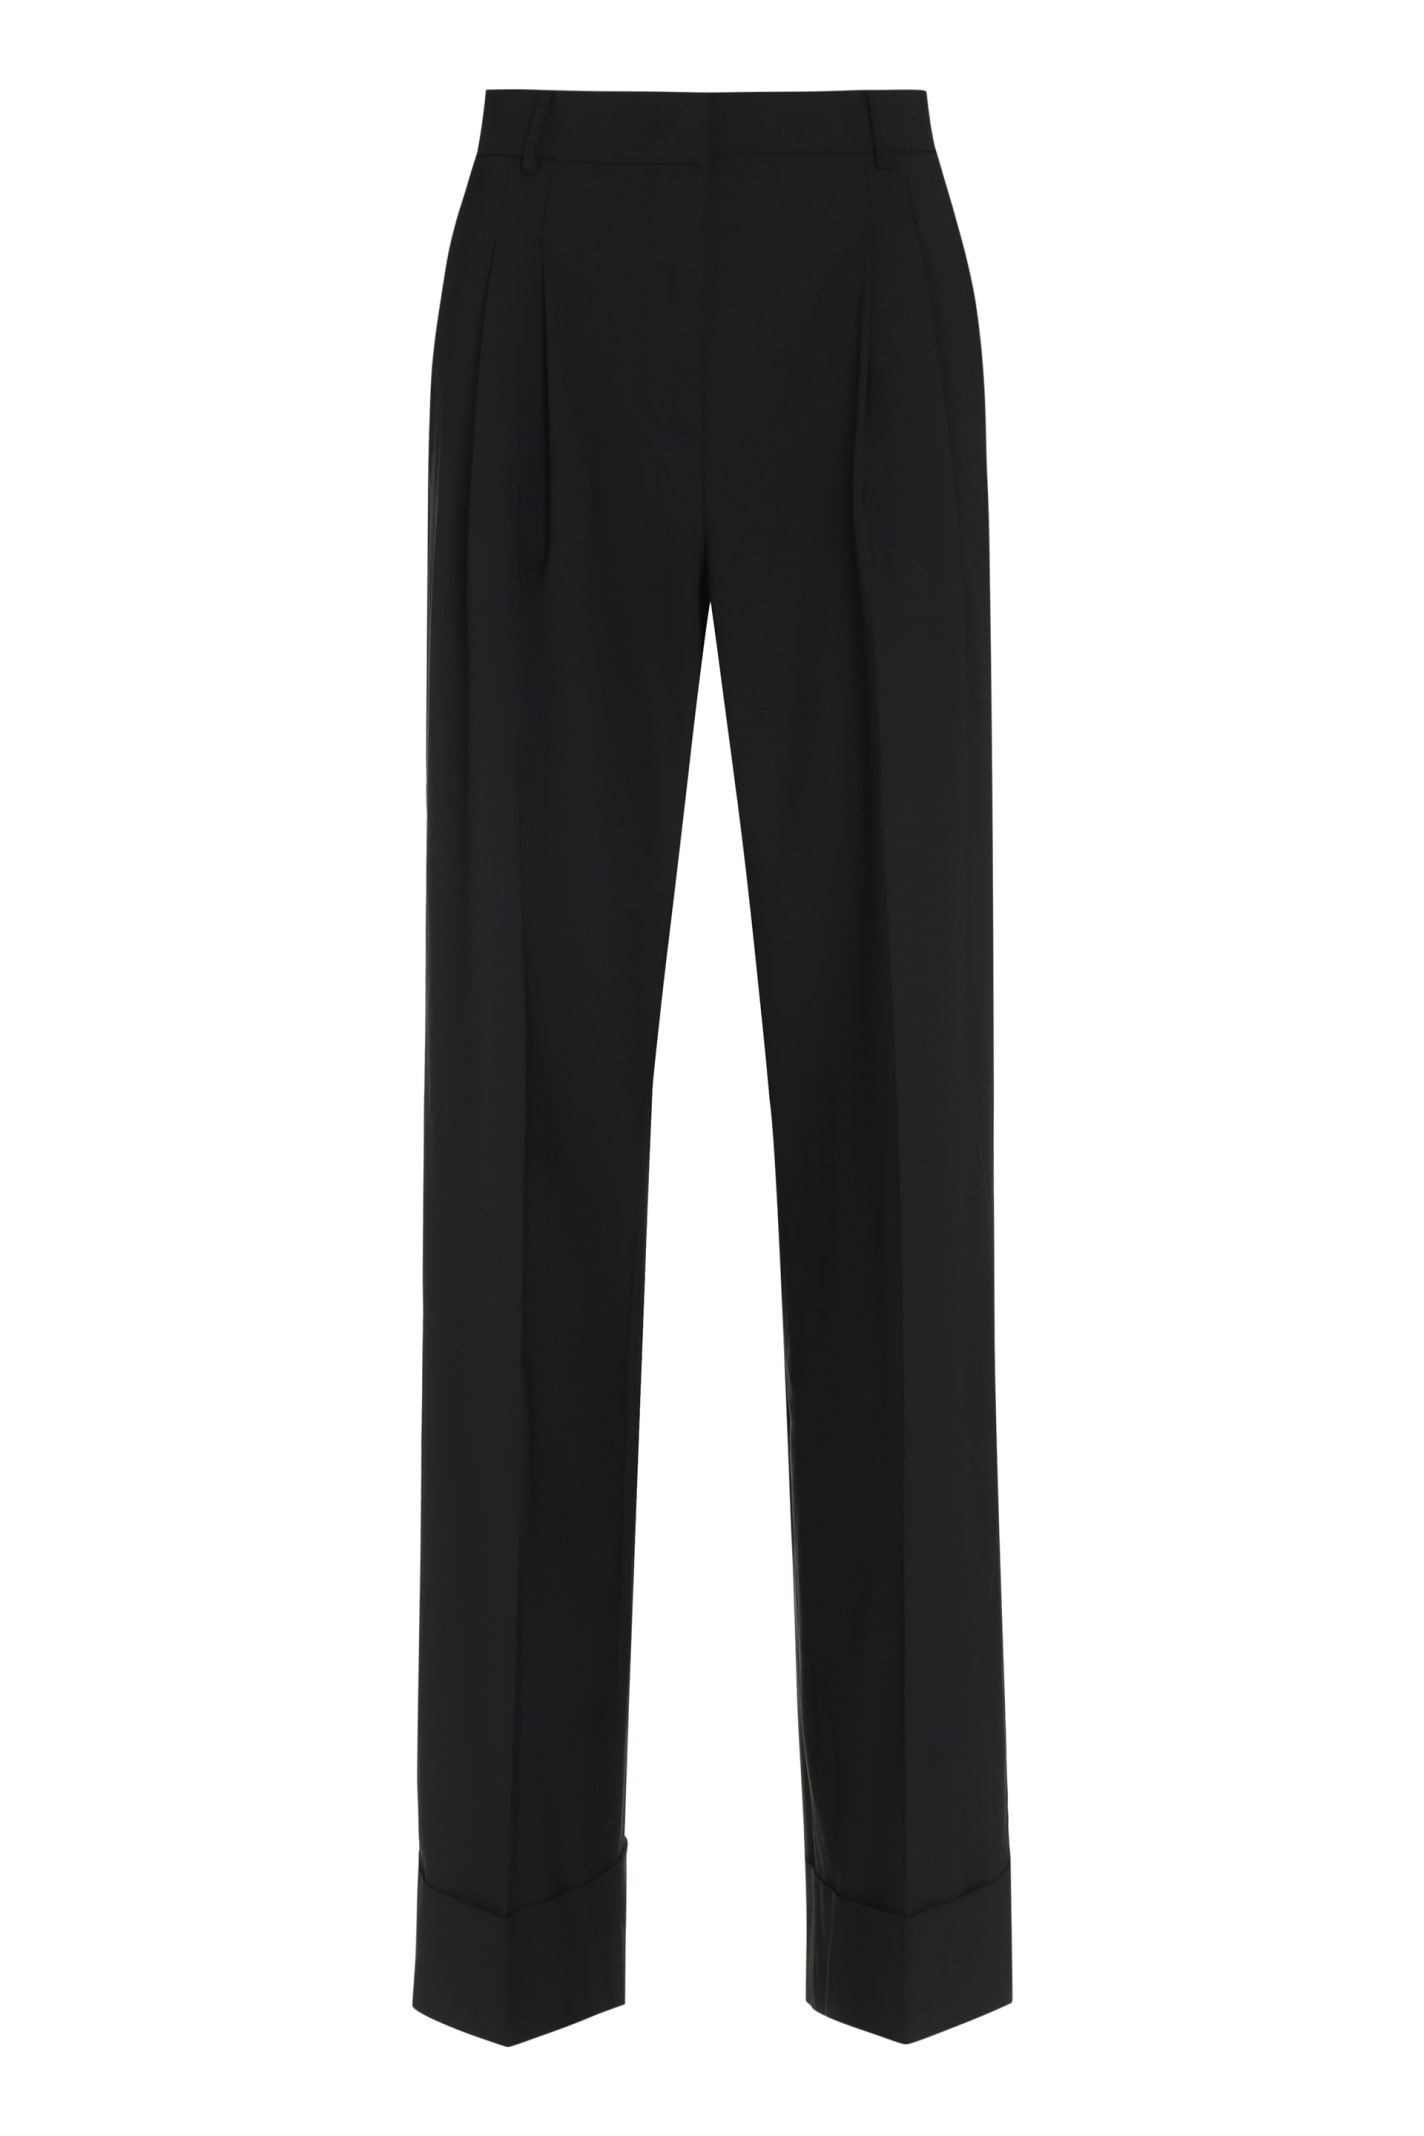 THE ANDAMANE WOOL BLEND TROUSERS